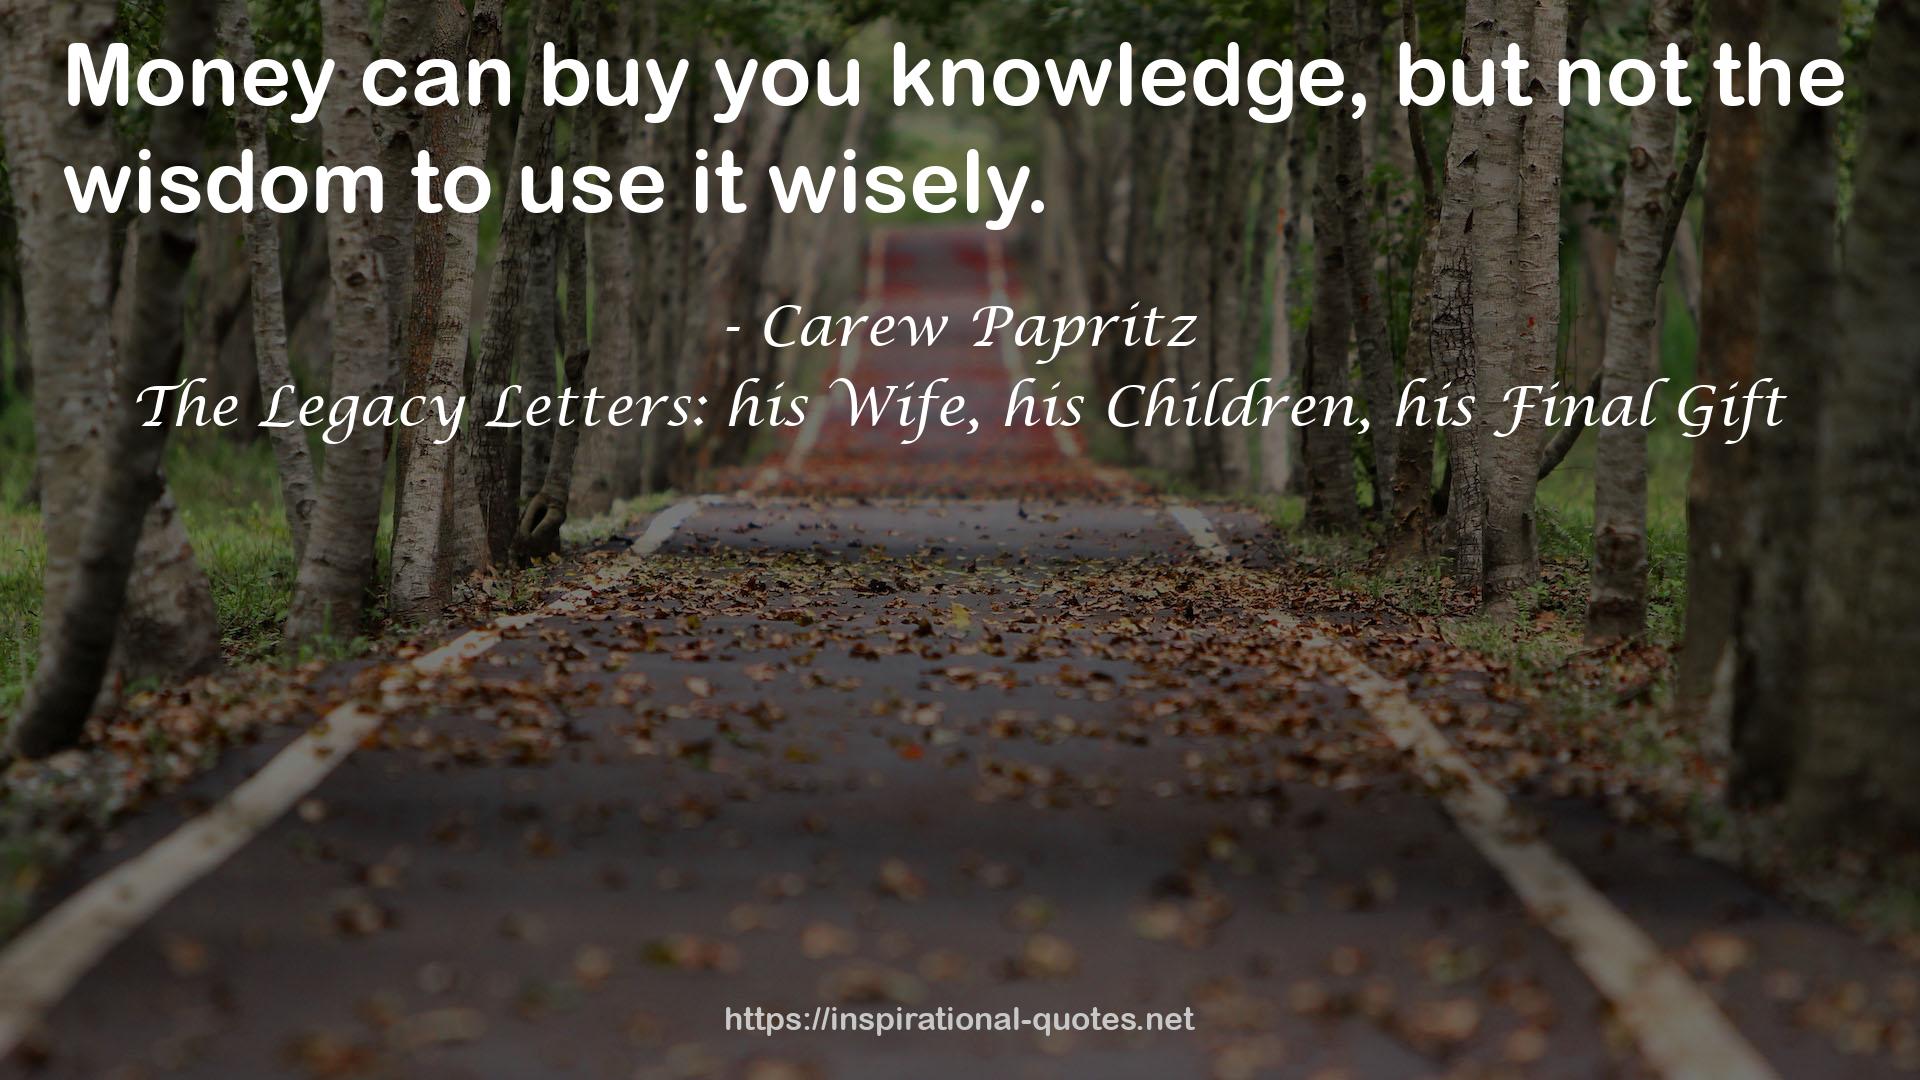 The Legacy Letters: his Wife, his Children, his Final Gift QUOTES